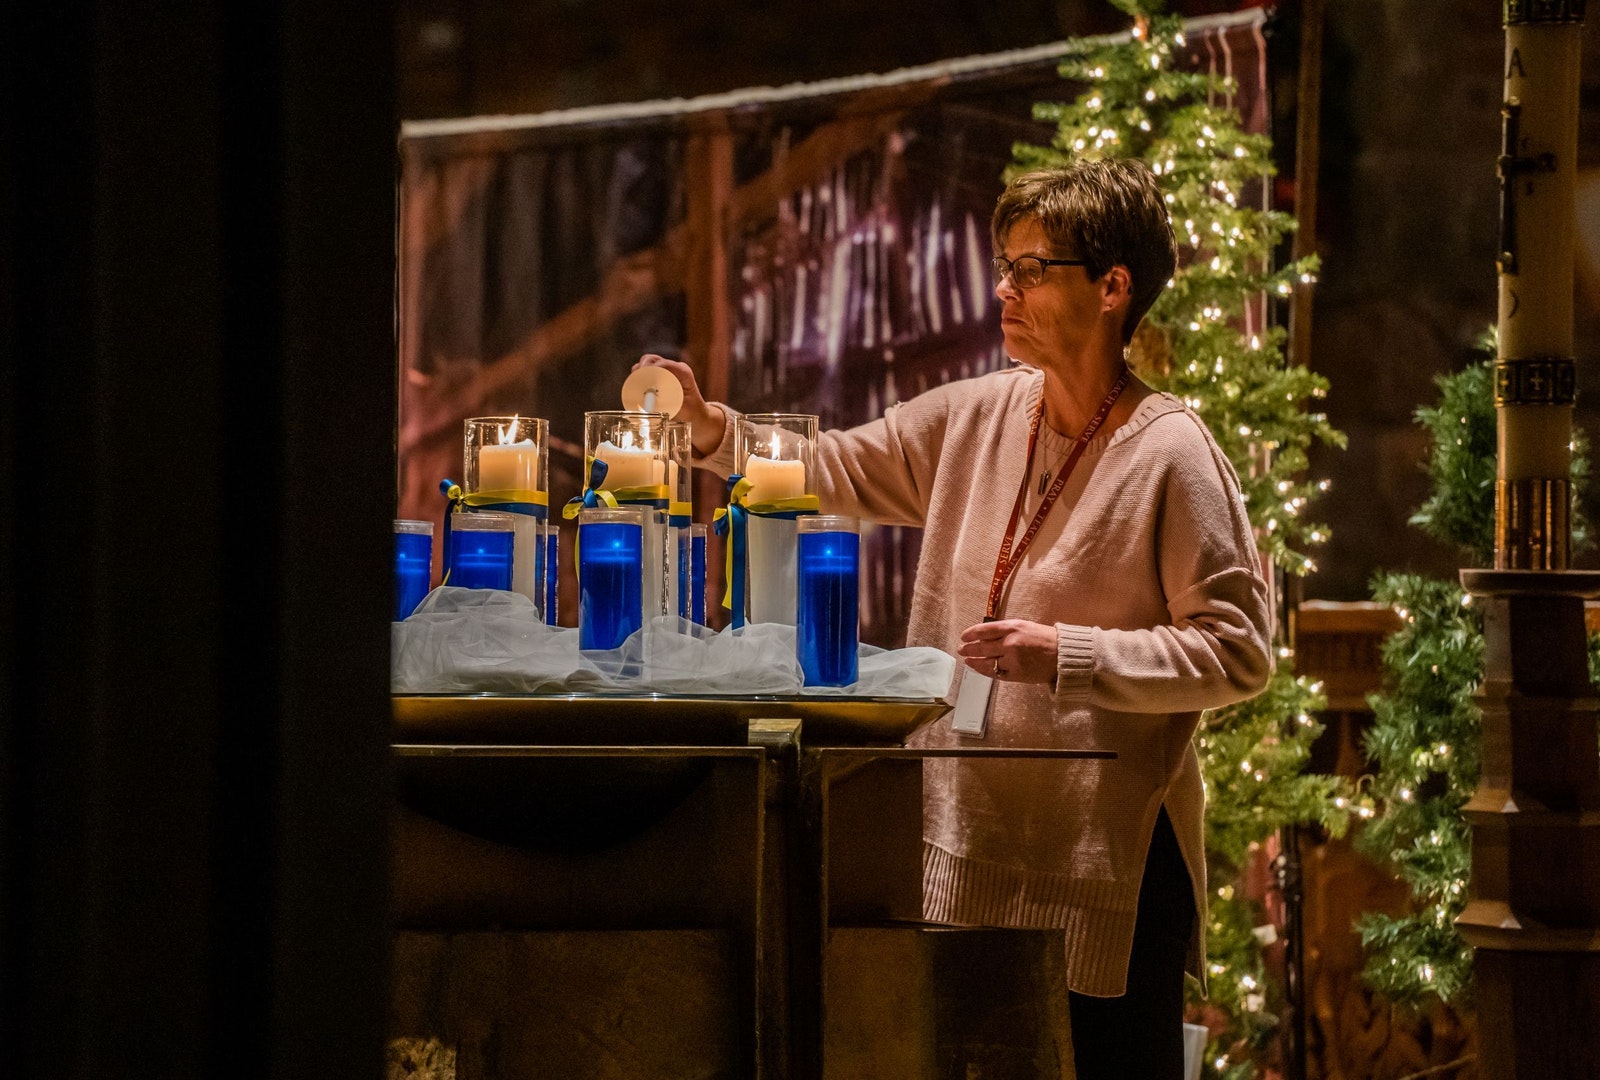 A woman lights a series of candles representing the 11 victims of the Oxford tragedy — four of whom died — during a memorial at St. Joseph Parish in Lake Orion. The parish was among several churches in the area who paid tribute to those lost and offered prayers for victims' families. (Valaurian Waller | Detroit Catholic)